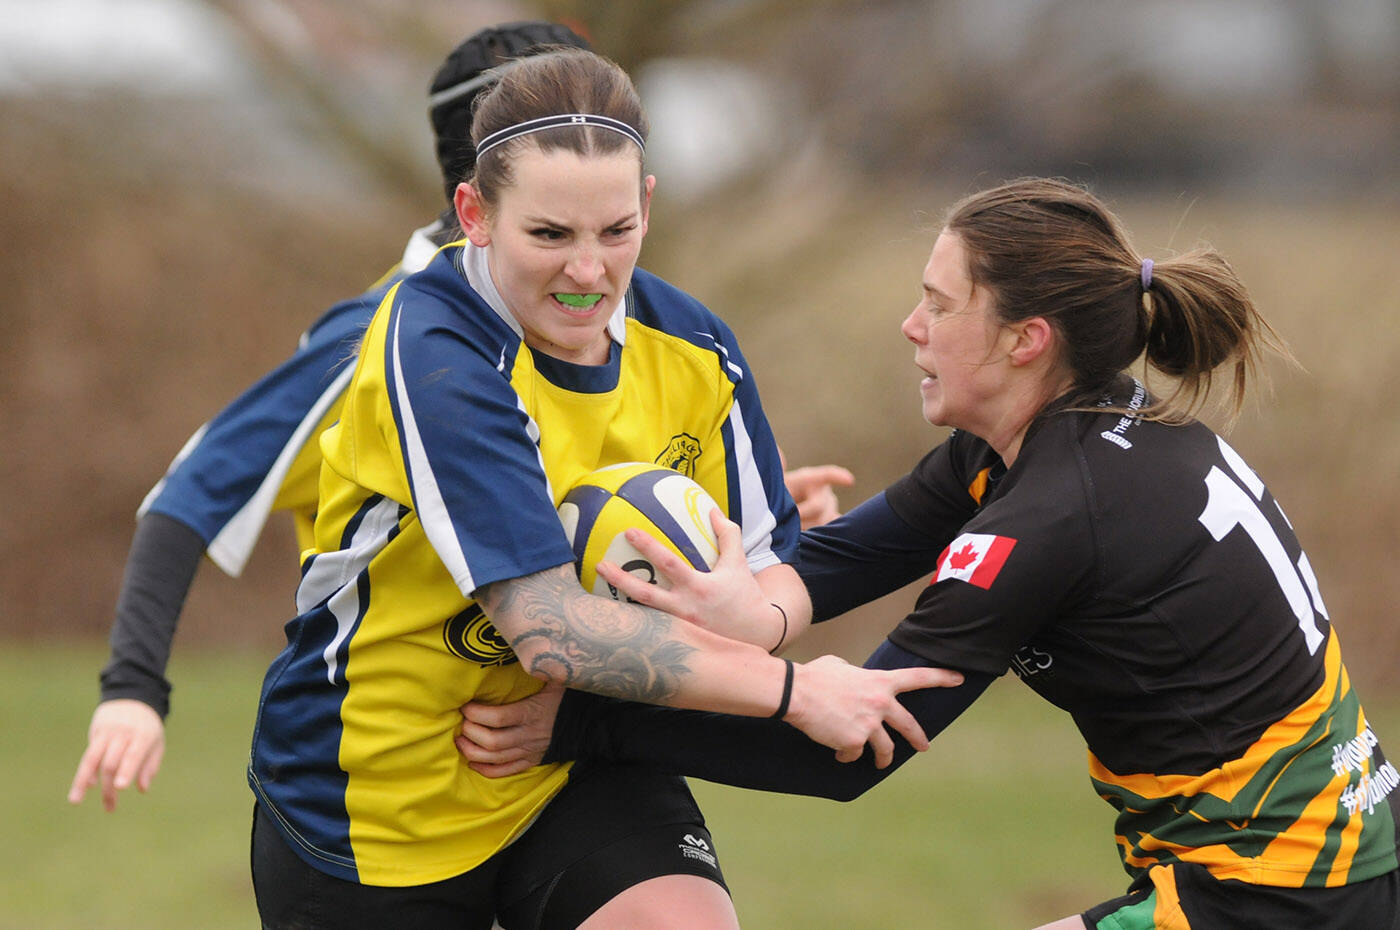 Nadine Heath of the Chilliwack Crusaders women's rugby team rips through a Langley player at Yarrow Sportsfield on Saturday, Feb. 26, 2022. That day marked the first ever home game for the new Chilliwack women's team. (Jenna Hauck/ Chilliwack Progress)